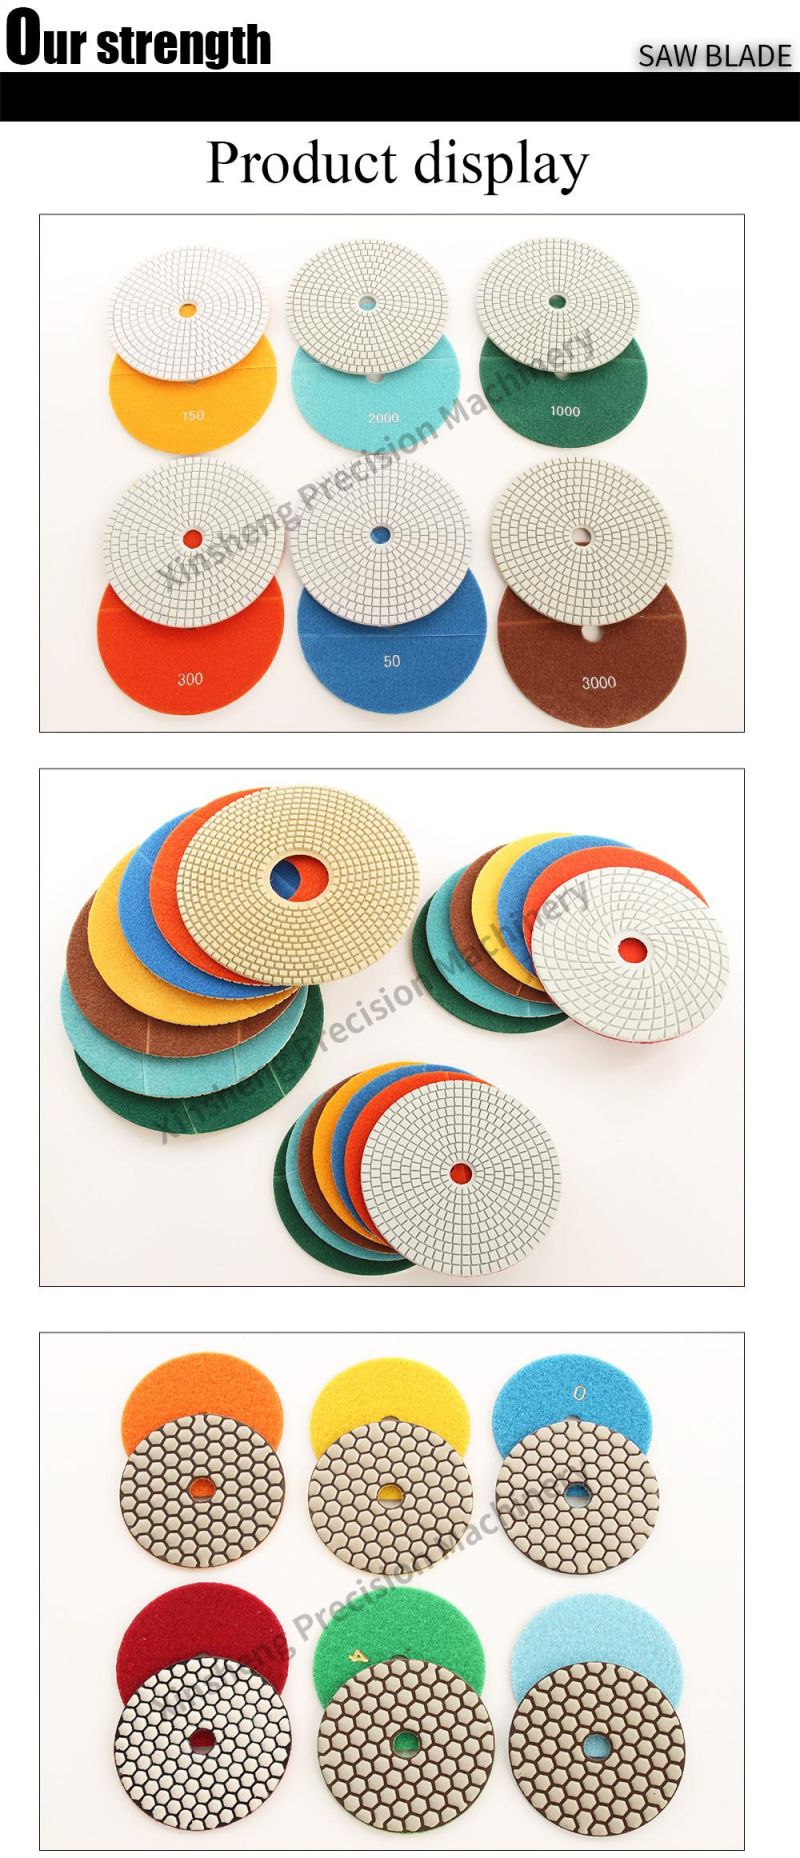 4inch Diamond Wet Use Resin Polishing Pads for Granite Marble Stone and Concrete